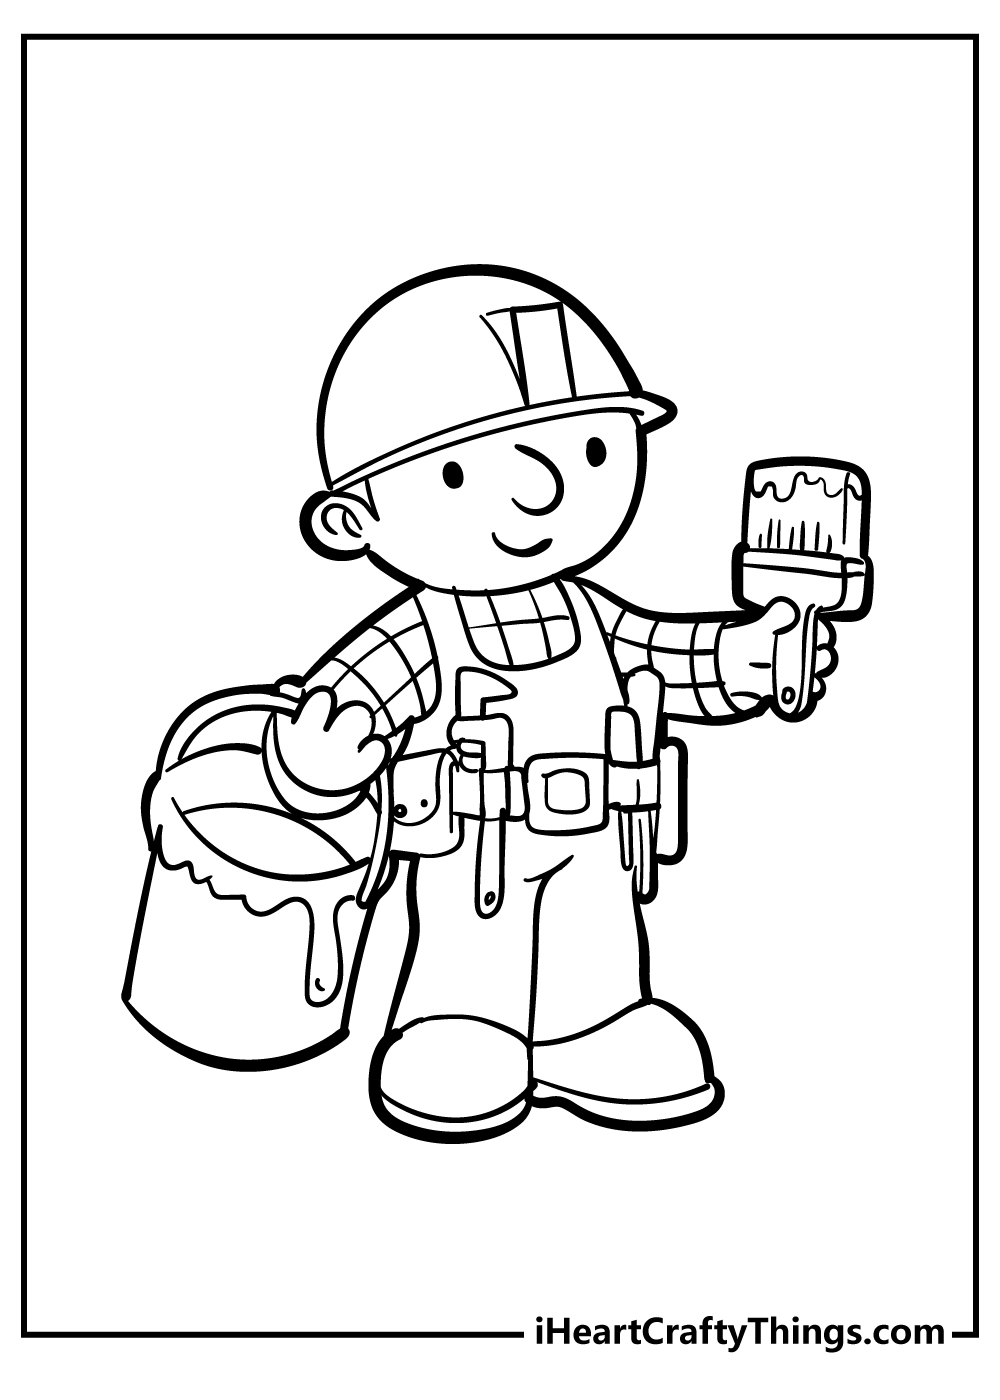 Bob the Builder Coloring Pages for preschoolers free printable